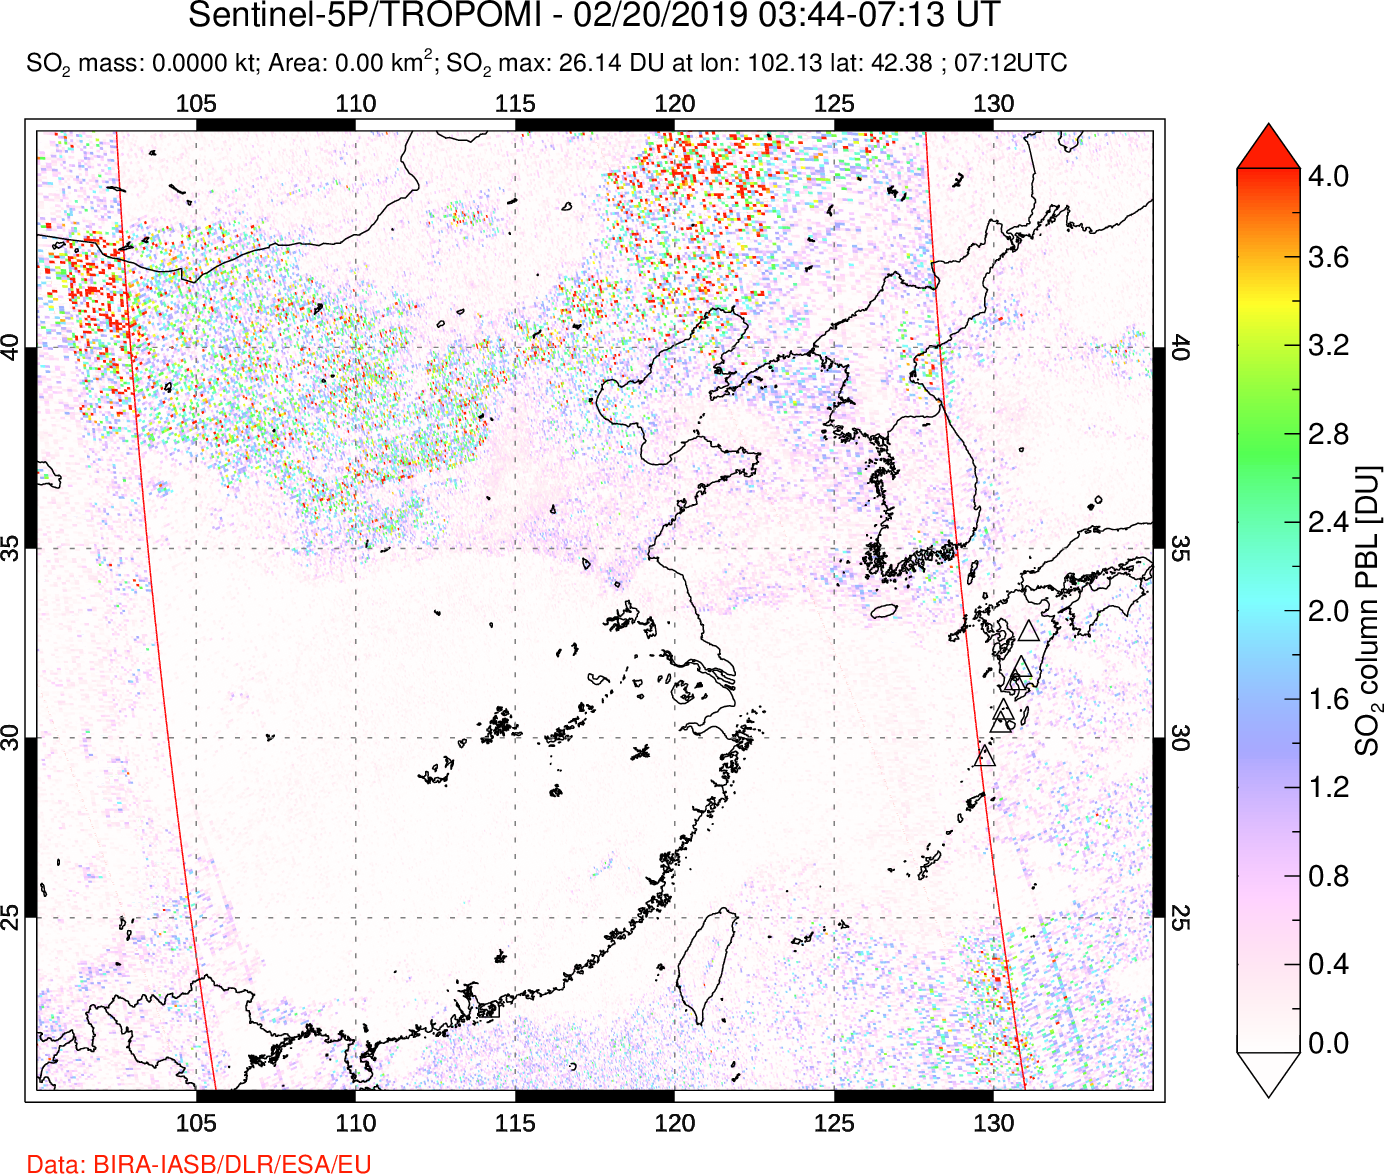 A sulfur dioxide image over Eastern China on Feb 20, 2019.